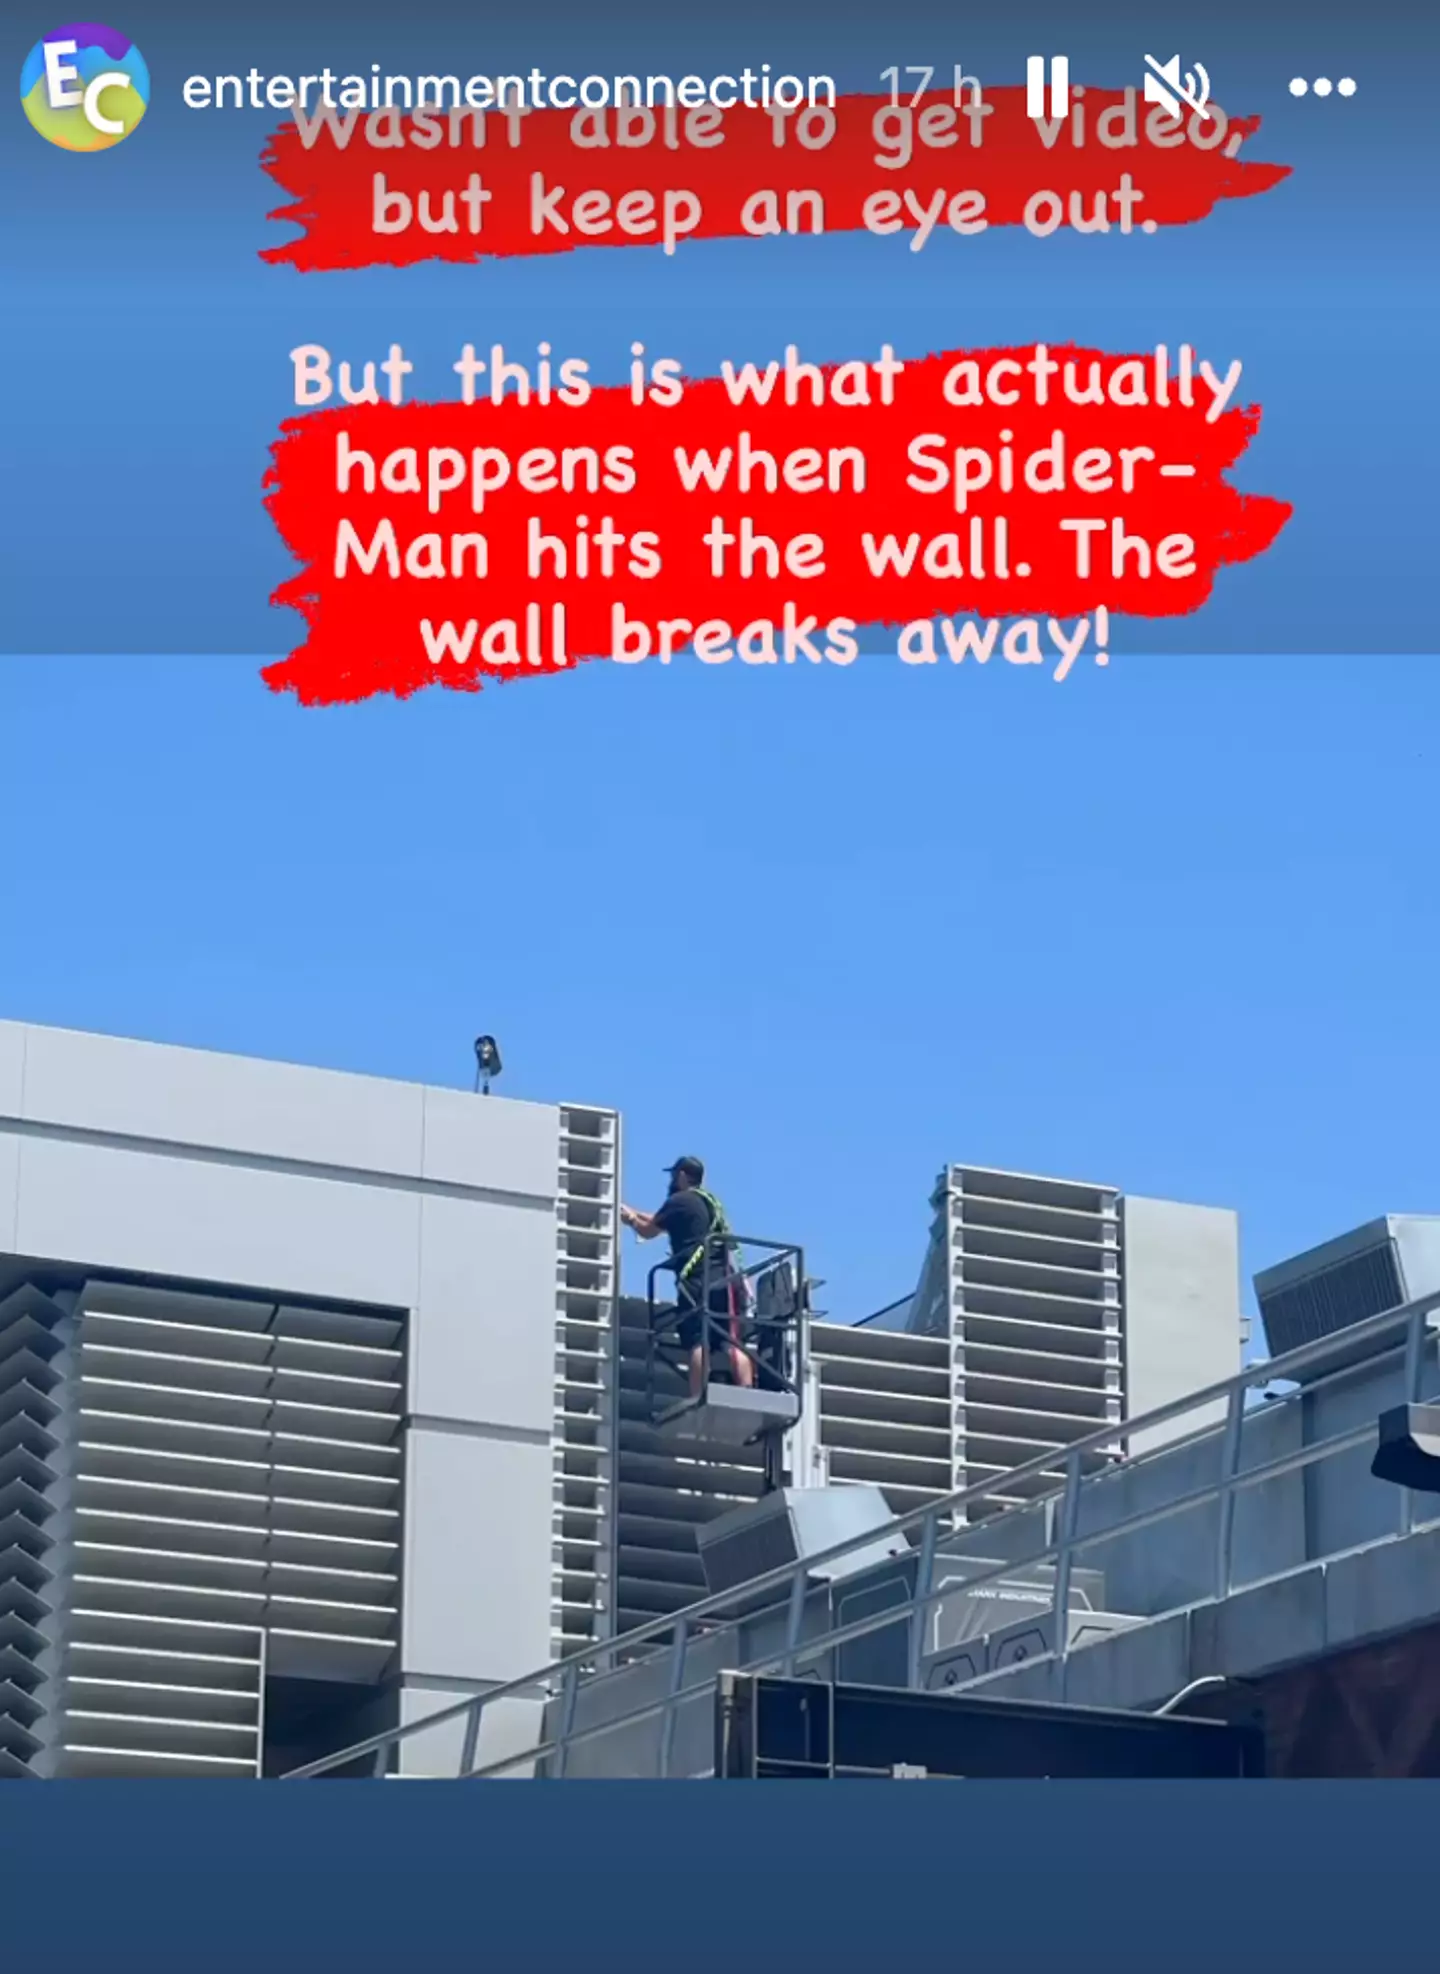 Crew members worked to fix the wall after Spider-Man's crash.